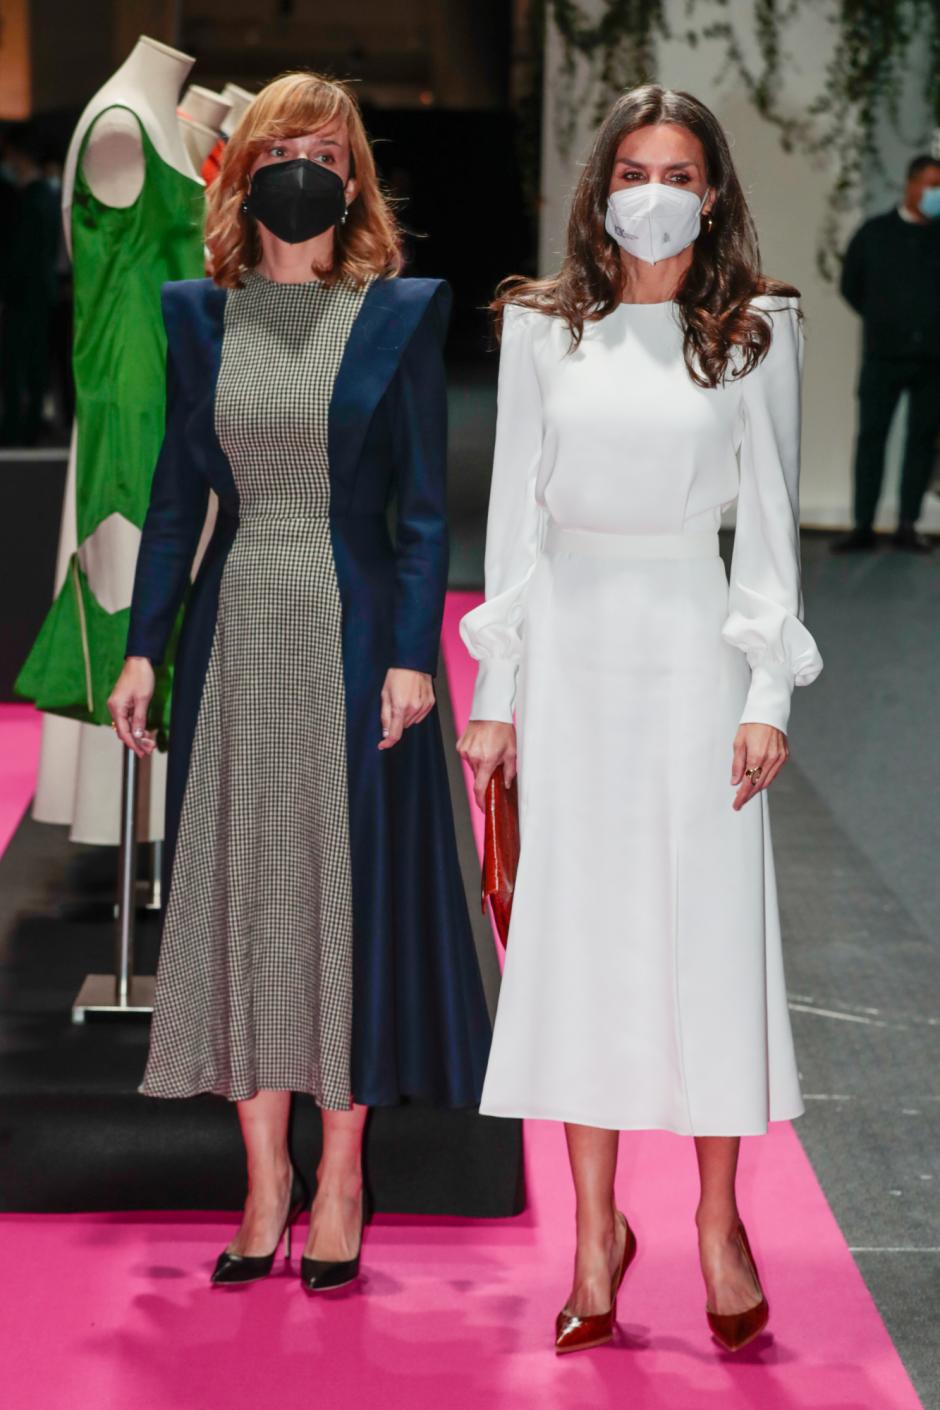 Spanish Queen Letizia arriving to 75 edition to Pasarela Cibeles Mercedes-Benz Fashion Week Madrid 2022 in Madrid, on Friday, 11 March 2022.